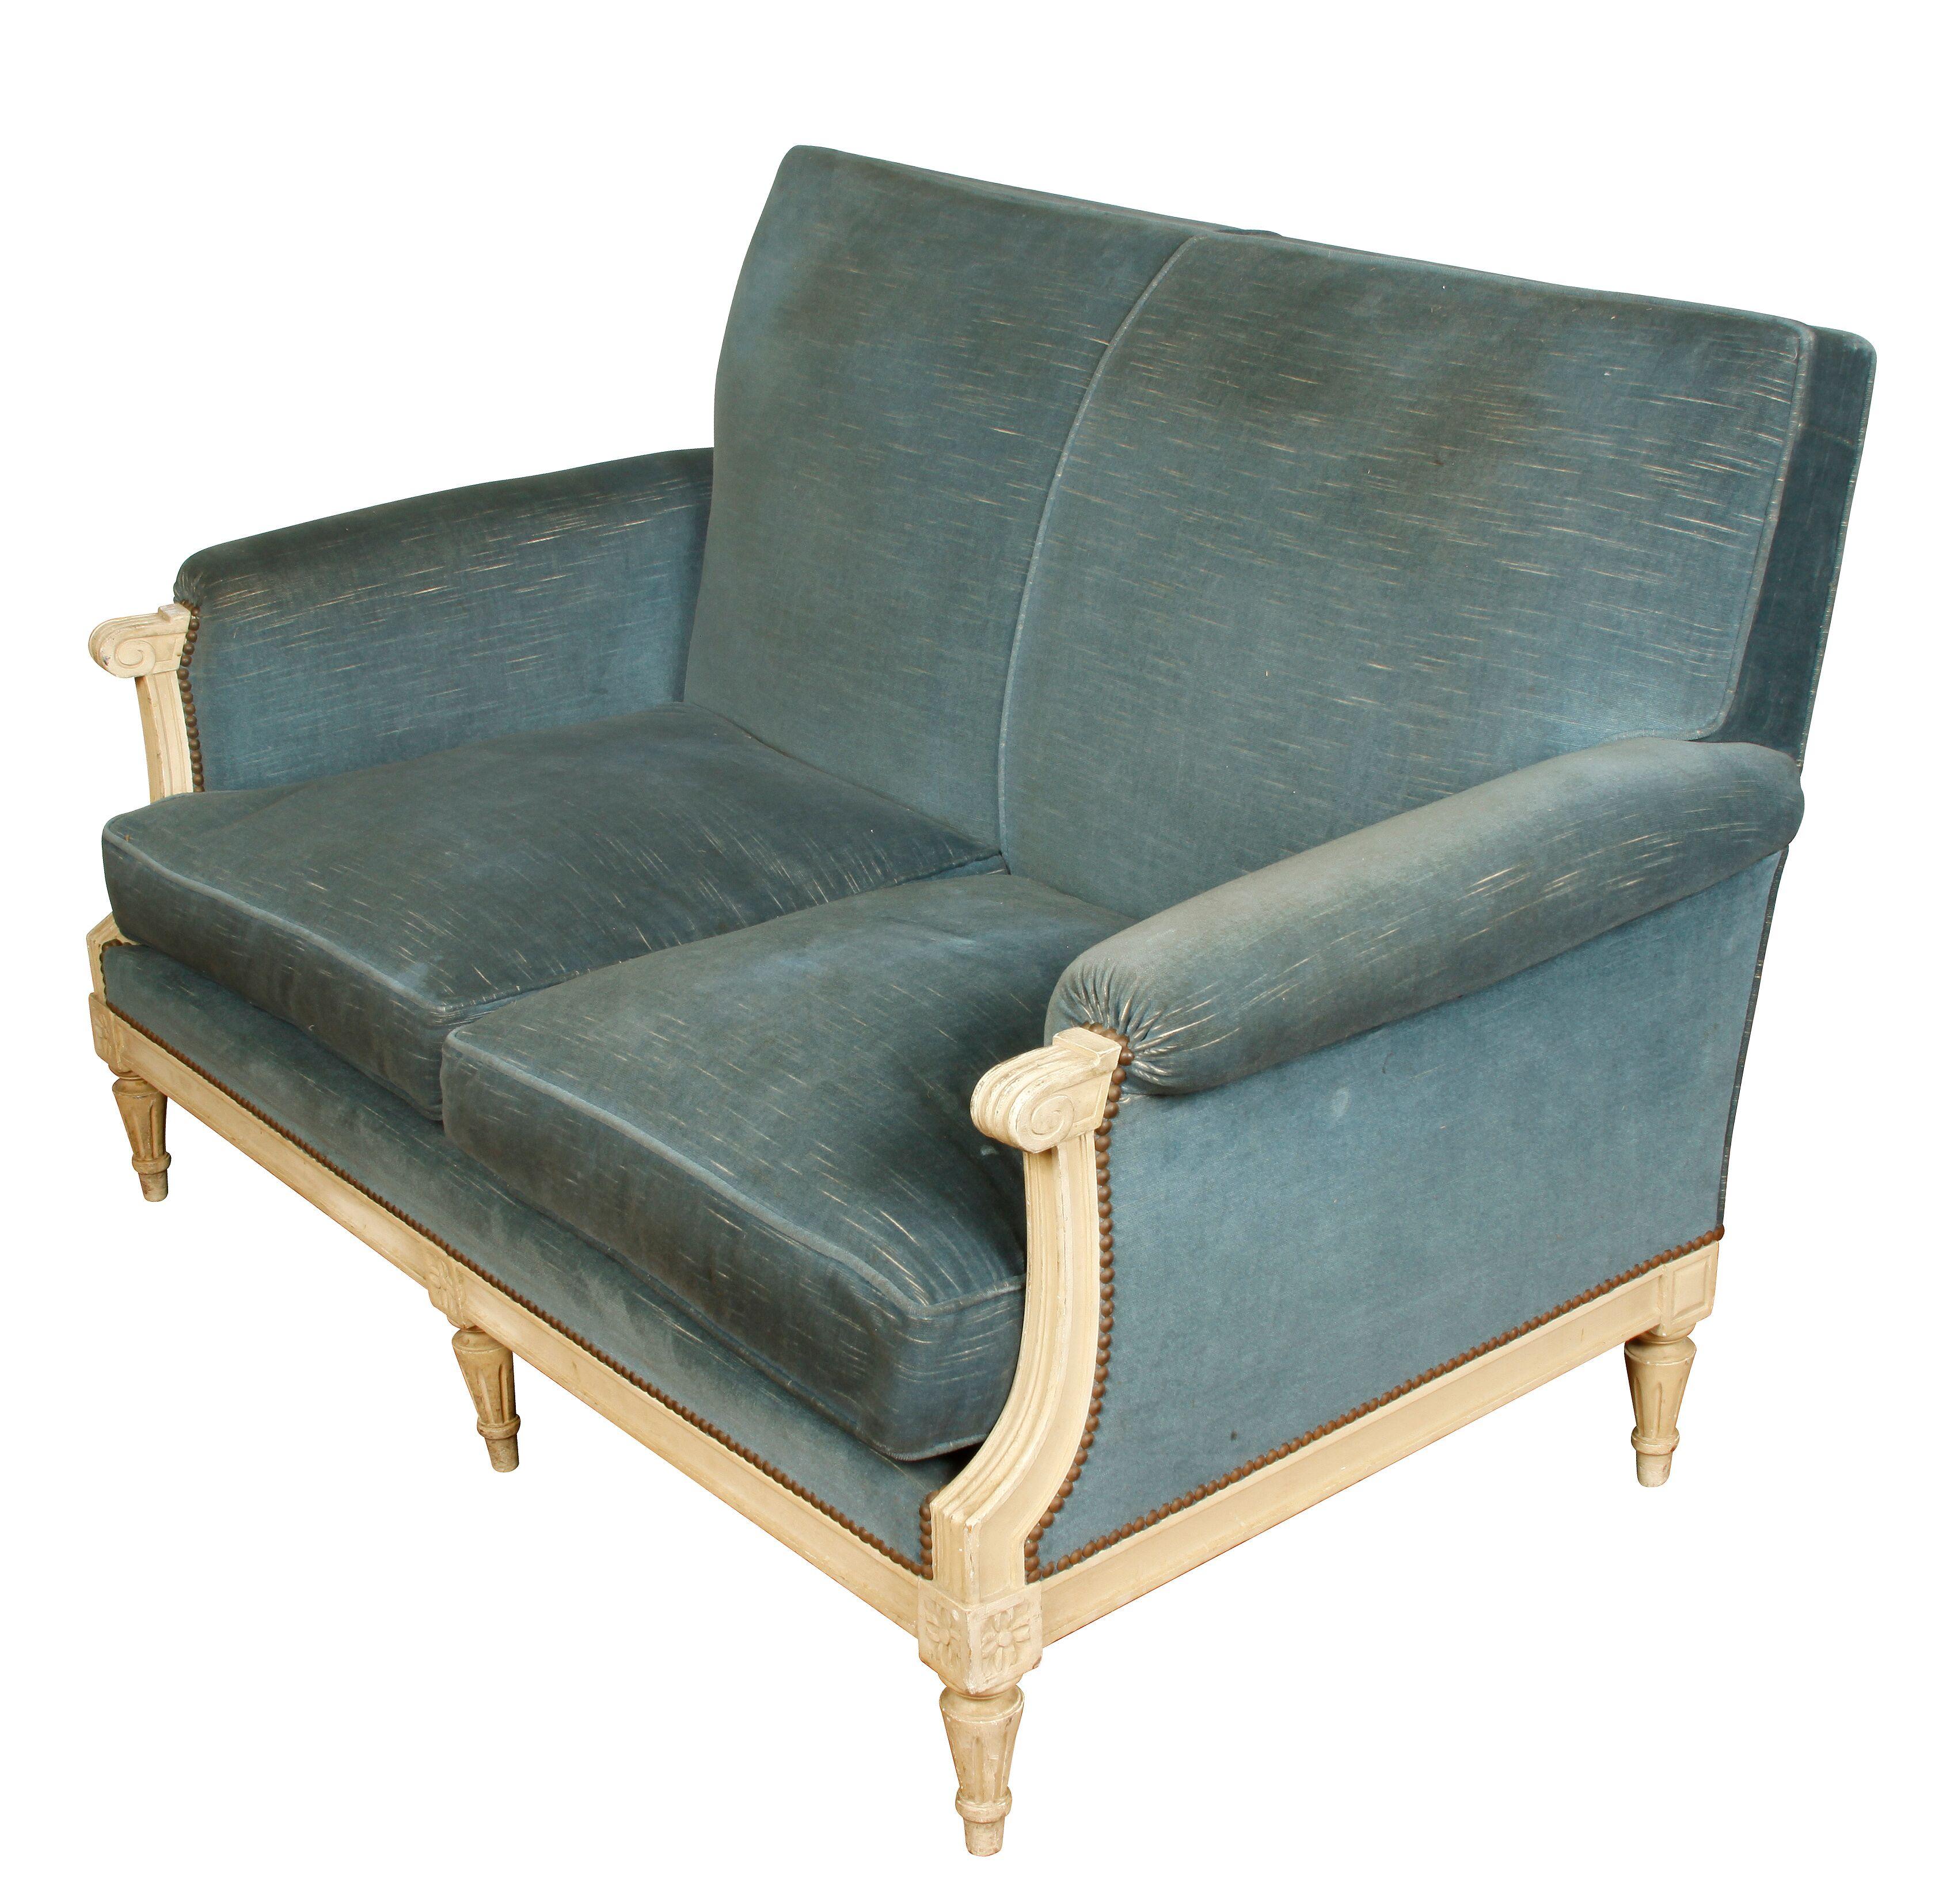 Painted Jansen Style Settee in blue fabric with nailhead trim, circa 1940.